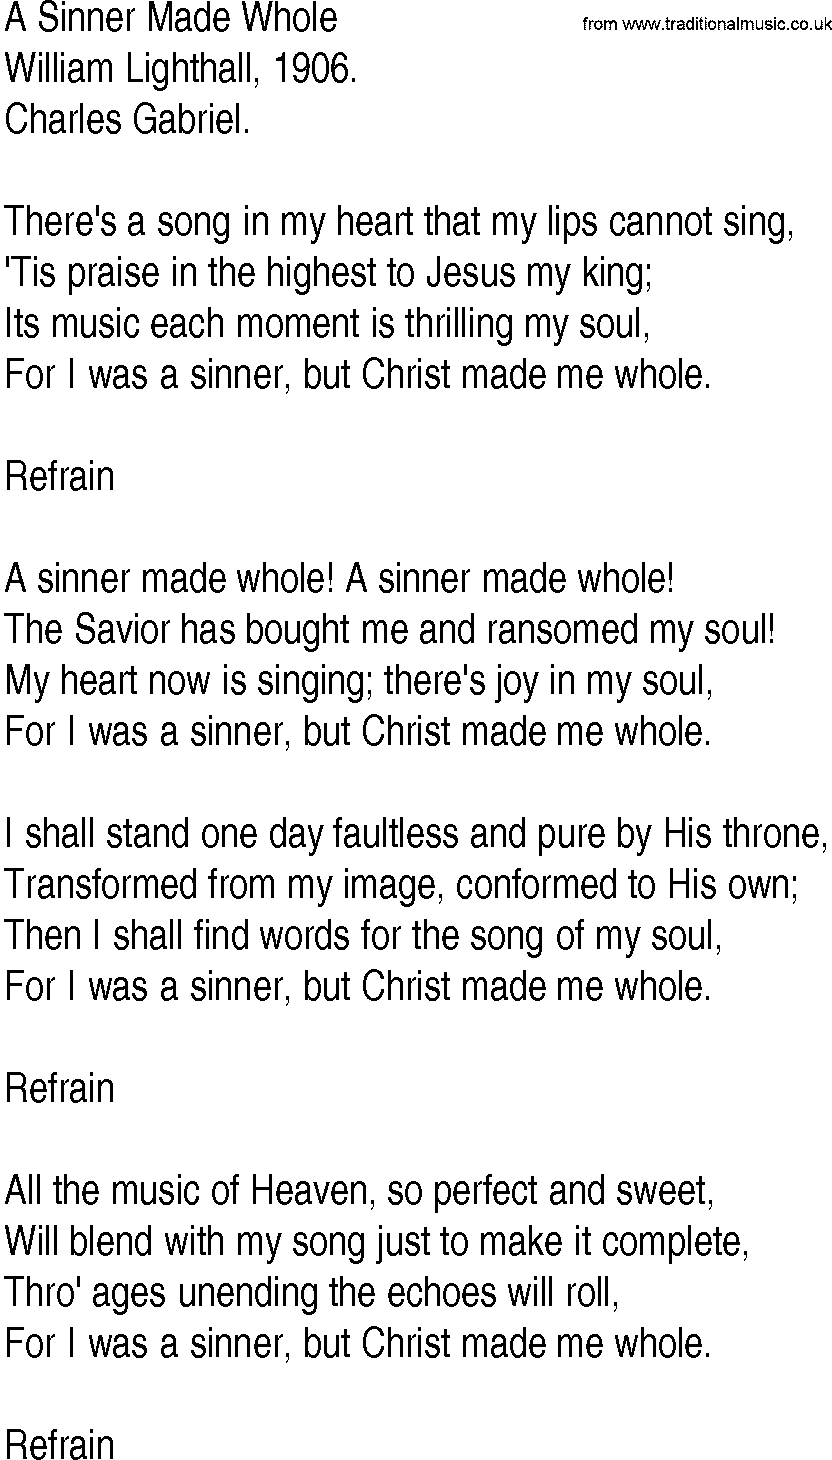 Hymn and Gospel Song: A Sinner Made Whole by William Lighthall lyrics